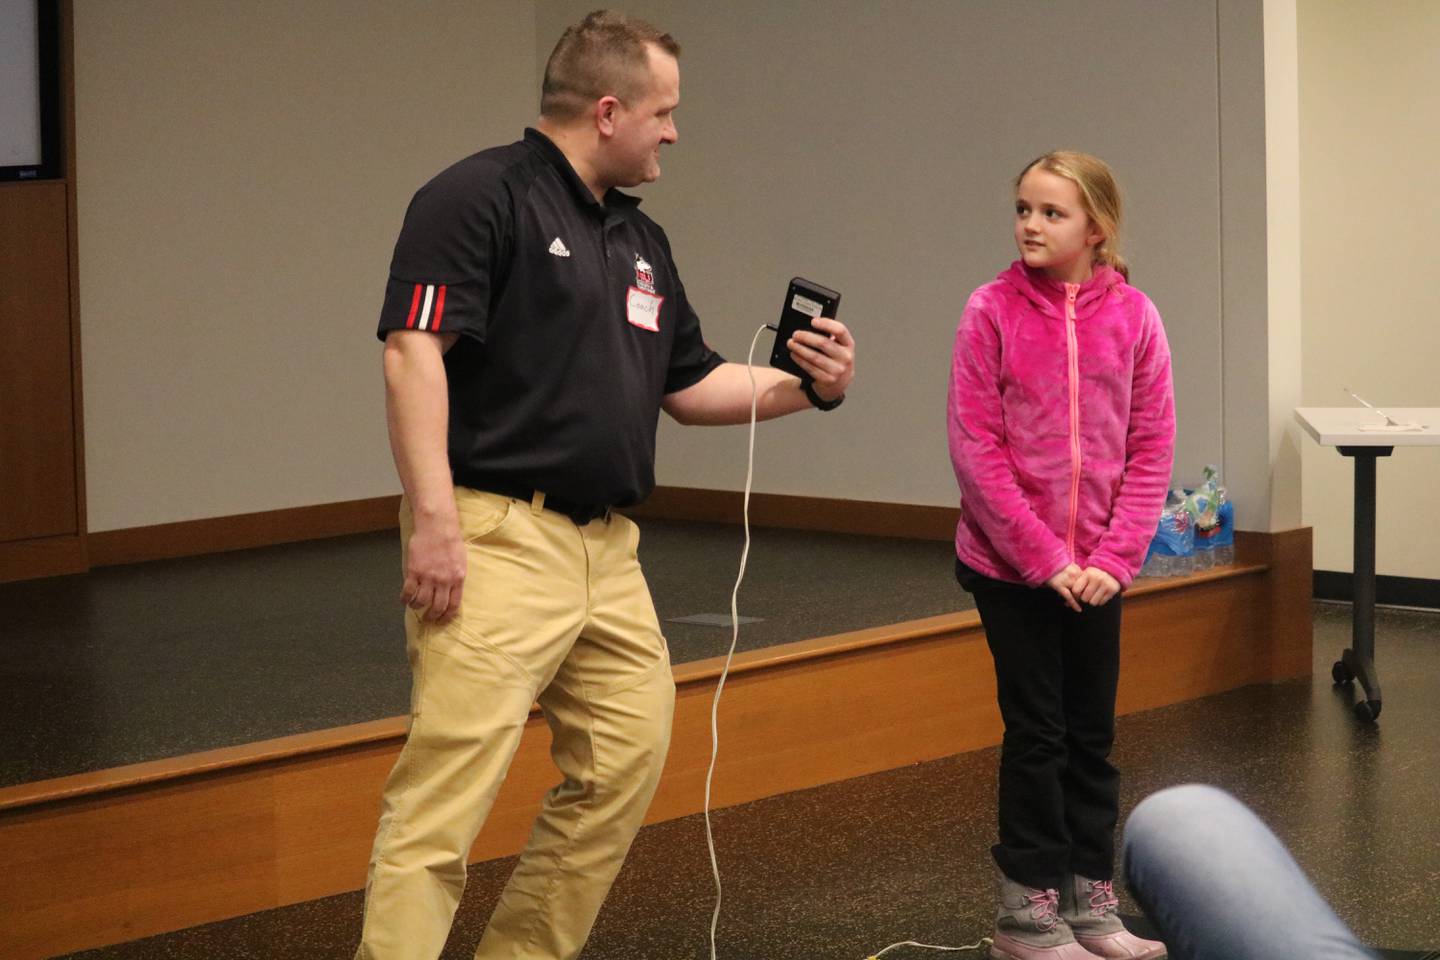 NIU instructor Brandon Male (left) leads a demonstration with assistance from Kate Grych, 9, on how to use a jump mat during the Teens and Family  STEM Cafe, put on Jan. 12 at the DeKalb Public Library.